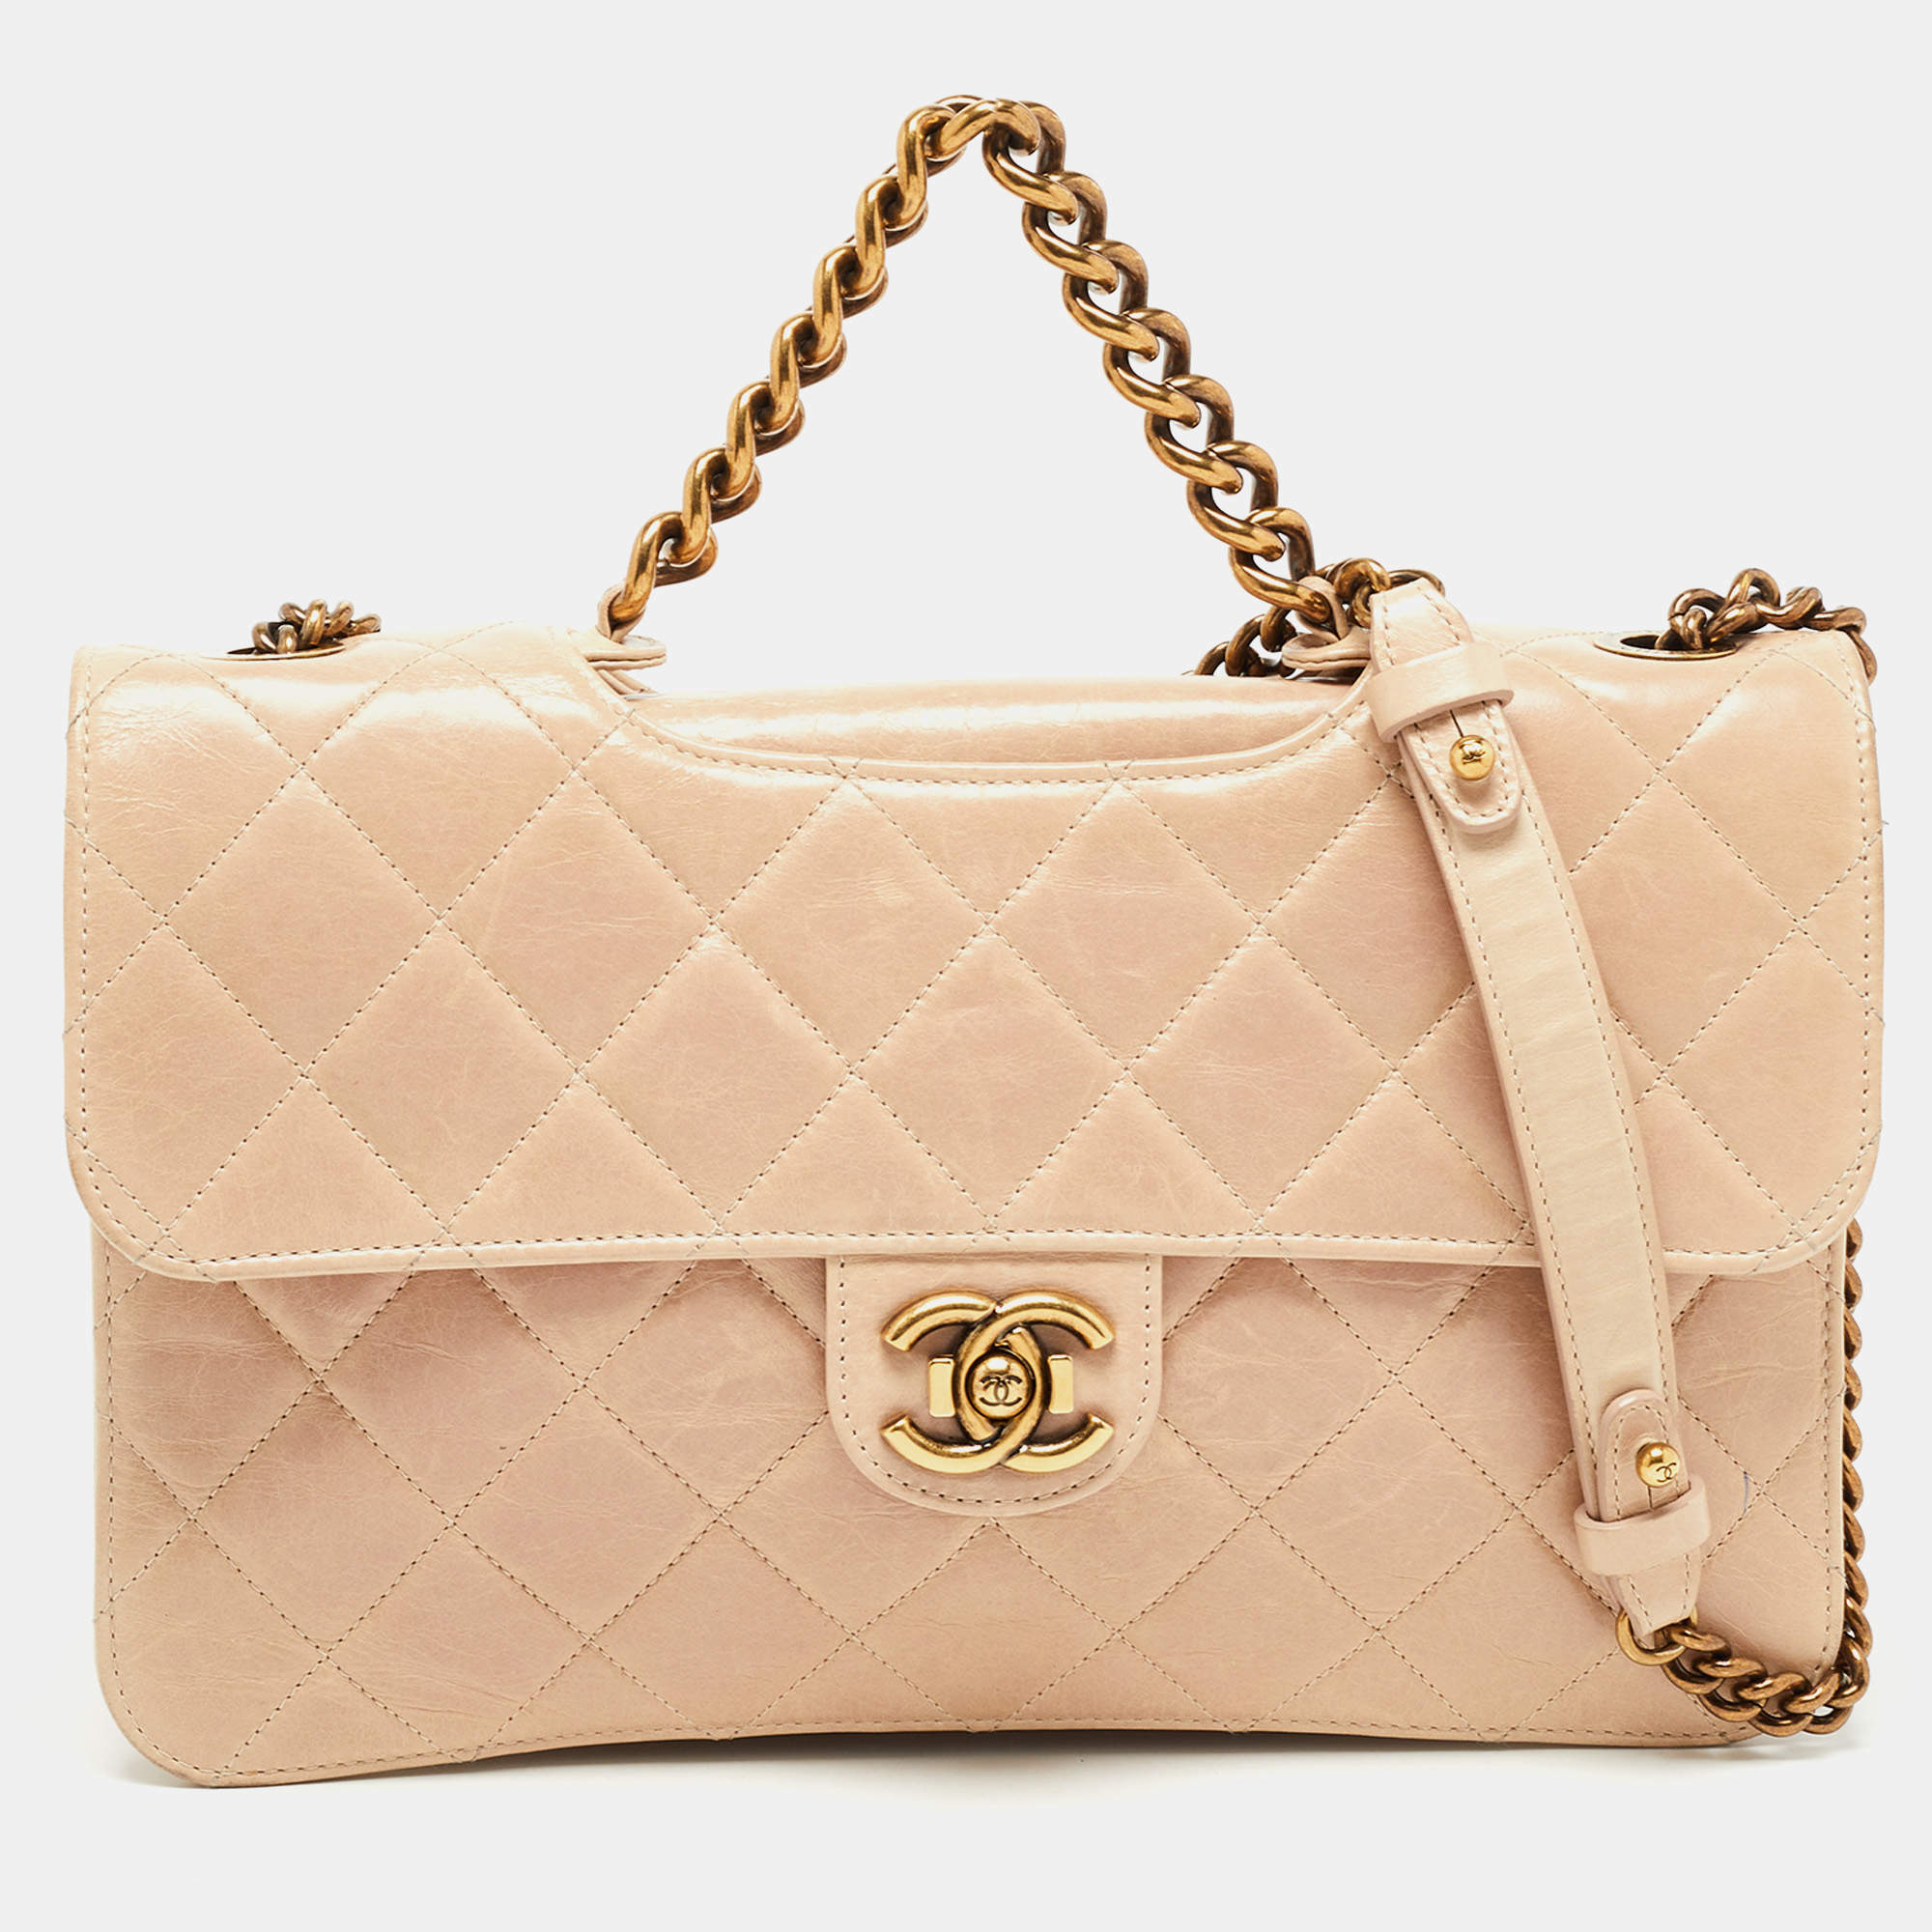 Chanel Beige Quilted Leather Large Perfect Edge Flap Bag